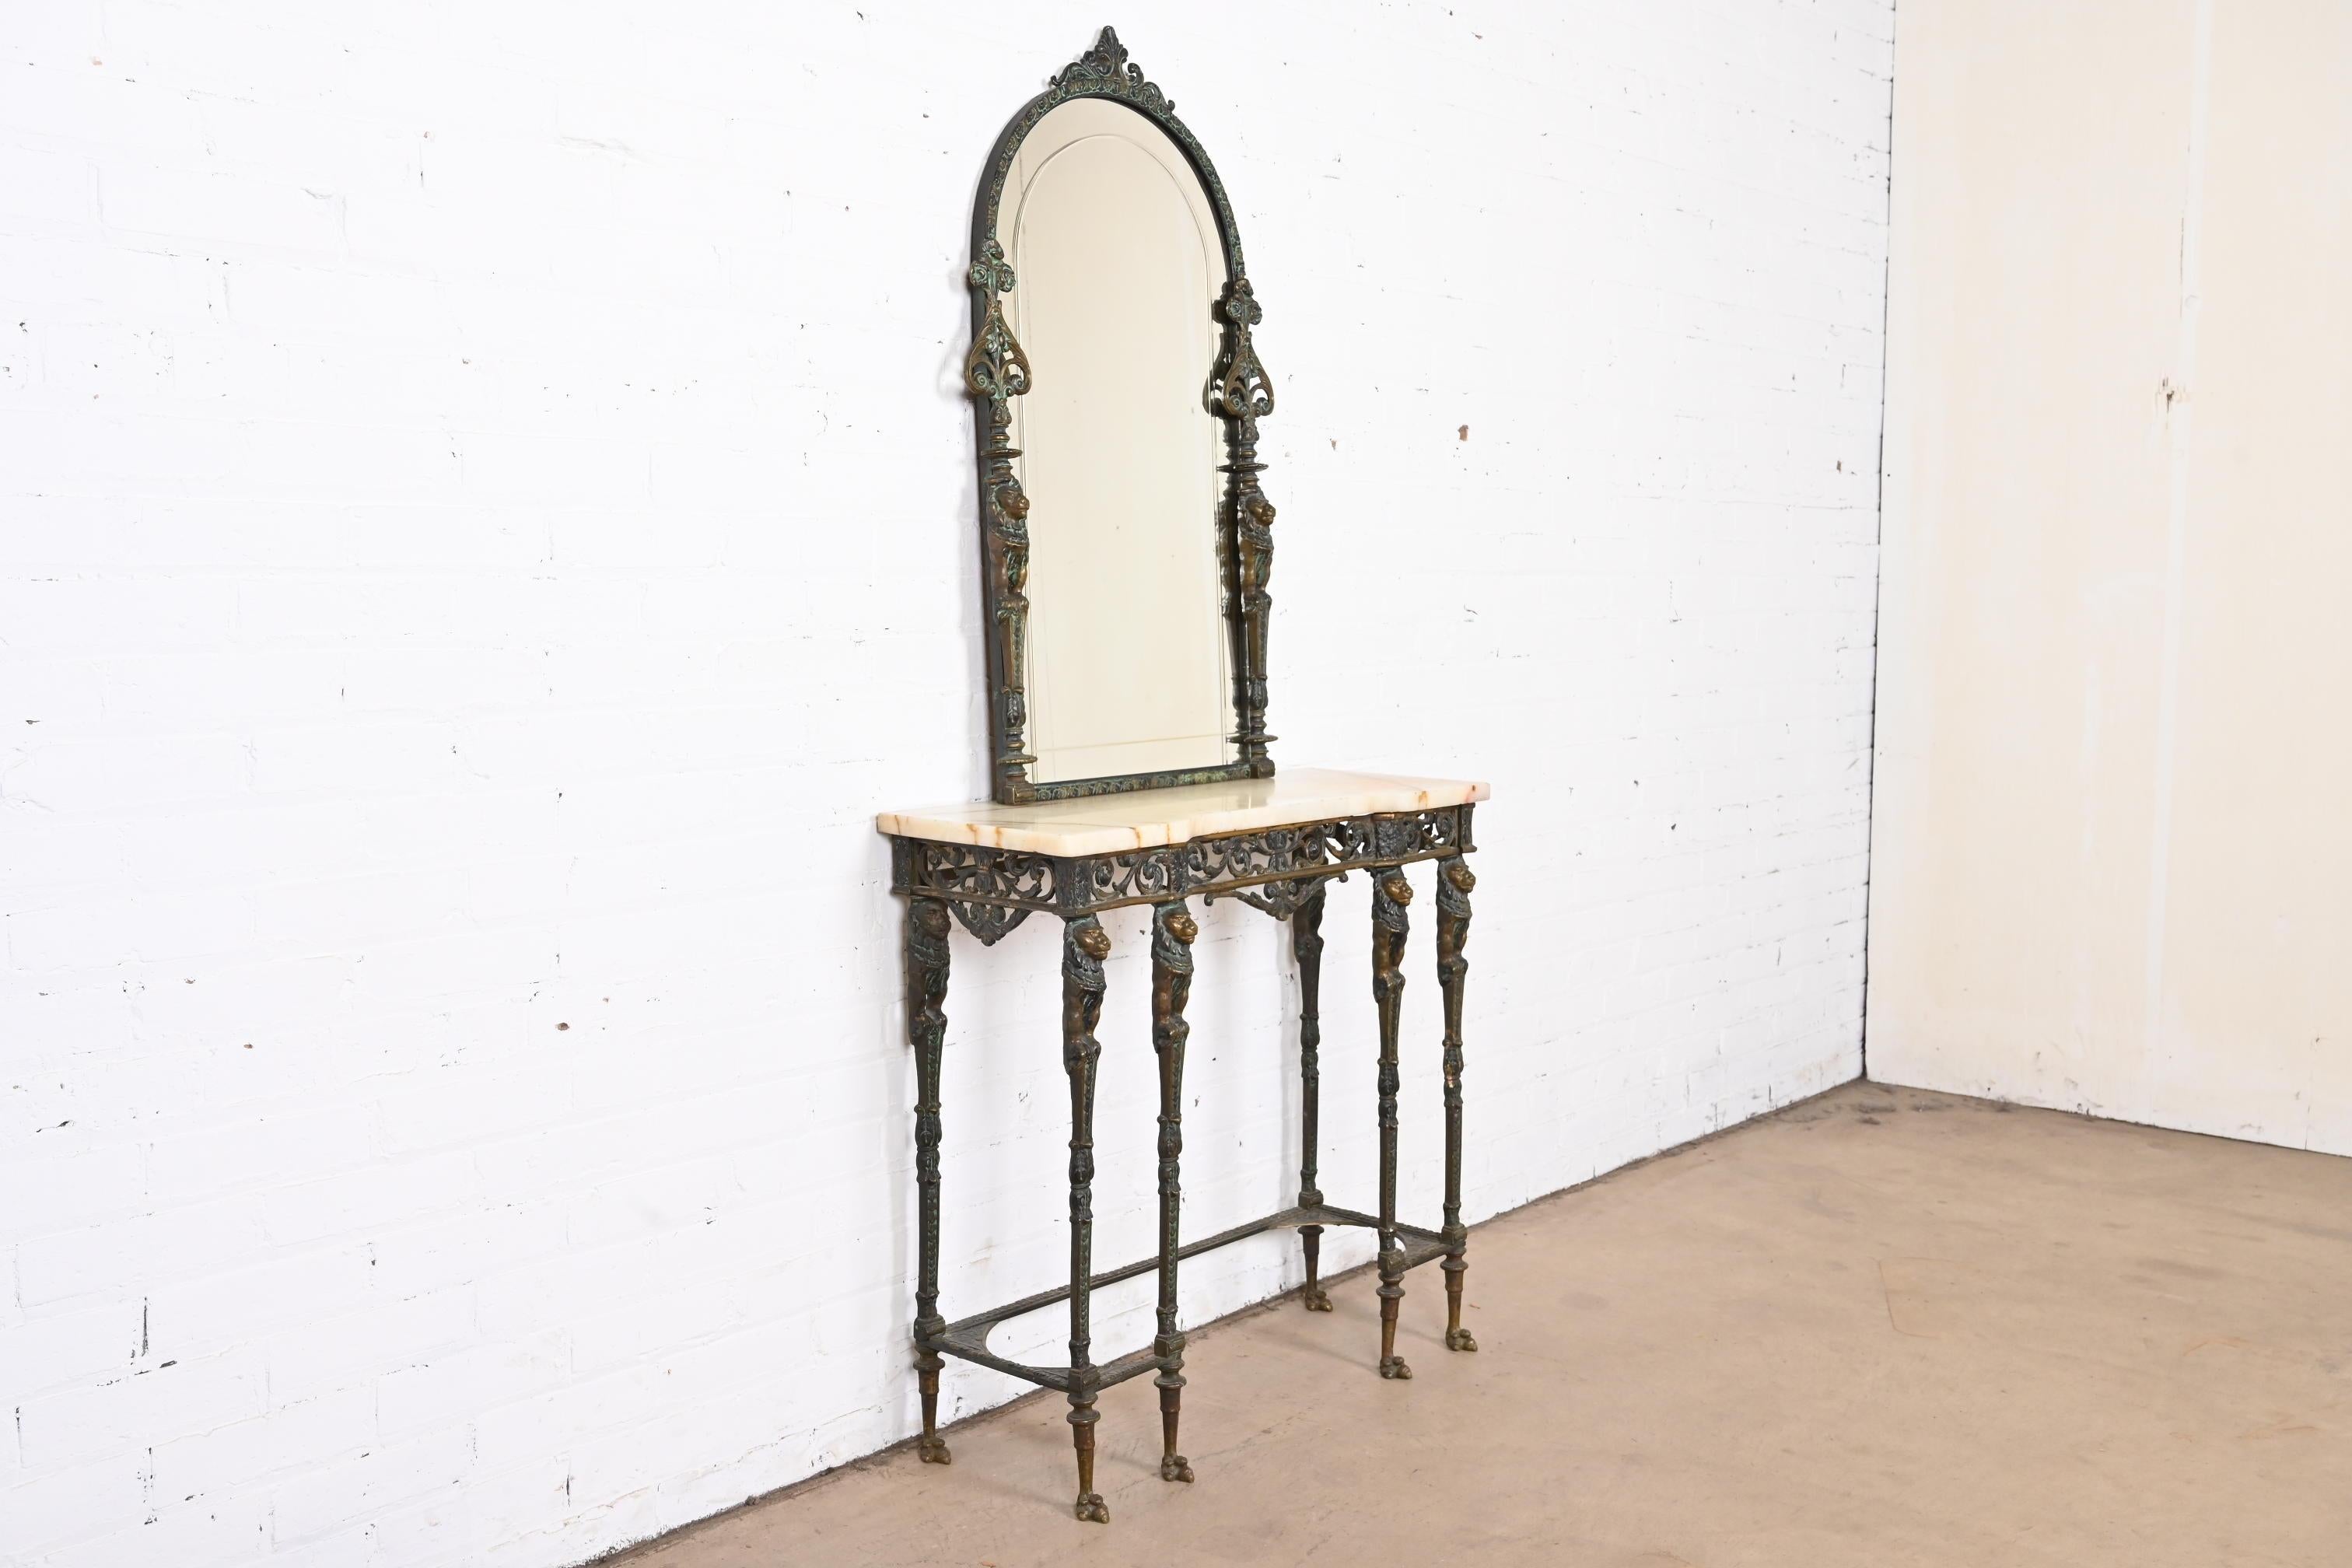 A gorgeous neoclassical or Empire style console table and wall mirror

Attributed to Oscar bach

USA, early 20th century

Stunning forged bronze with lion figures, marble top, and etched glass mirror.

Measures:
Table - 31